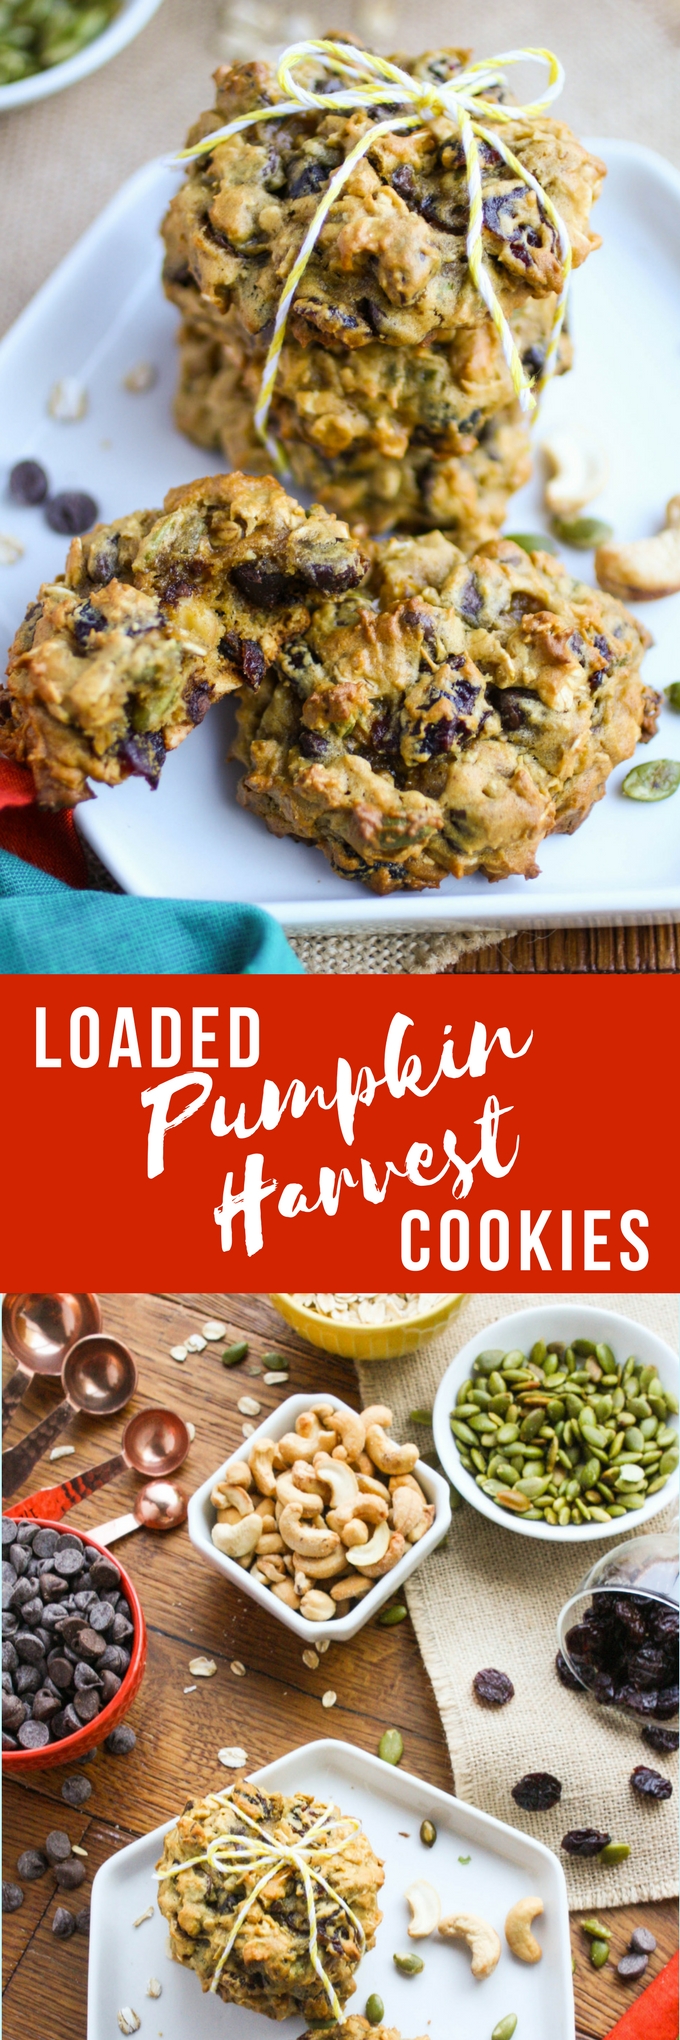 Loaded Pumpkin Harvest Cookies are the perfect fall treats! You'll love that these cookies are chewy and thick and filled with fall flavors!